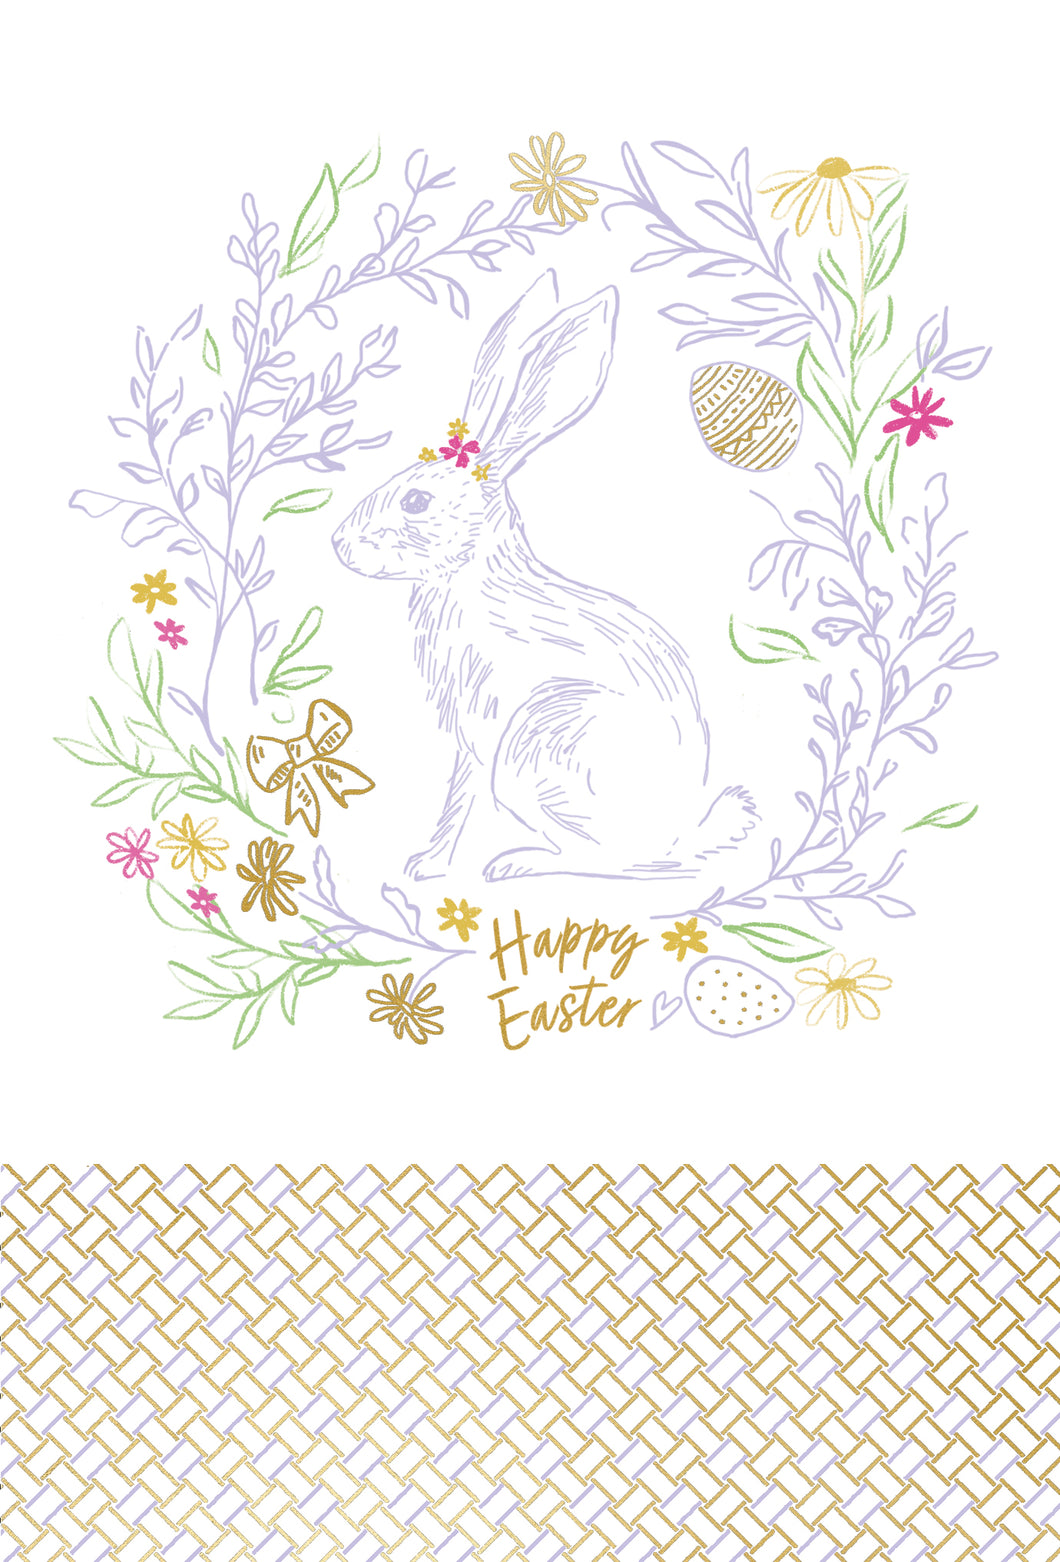 Classic Bunny Easter Card